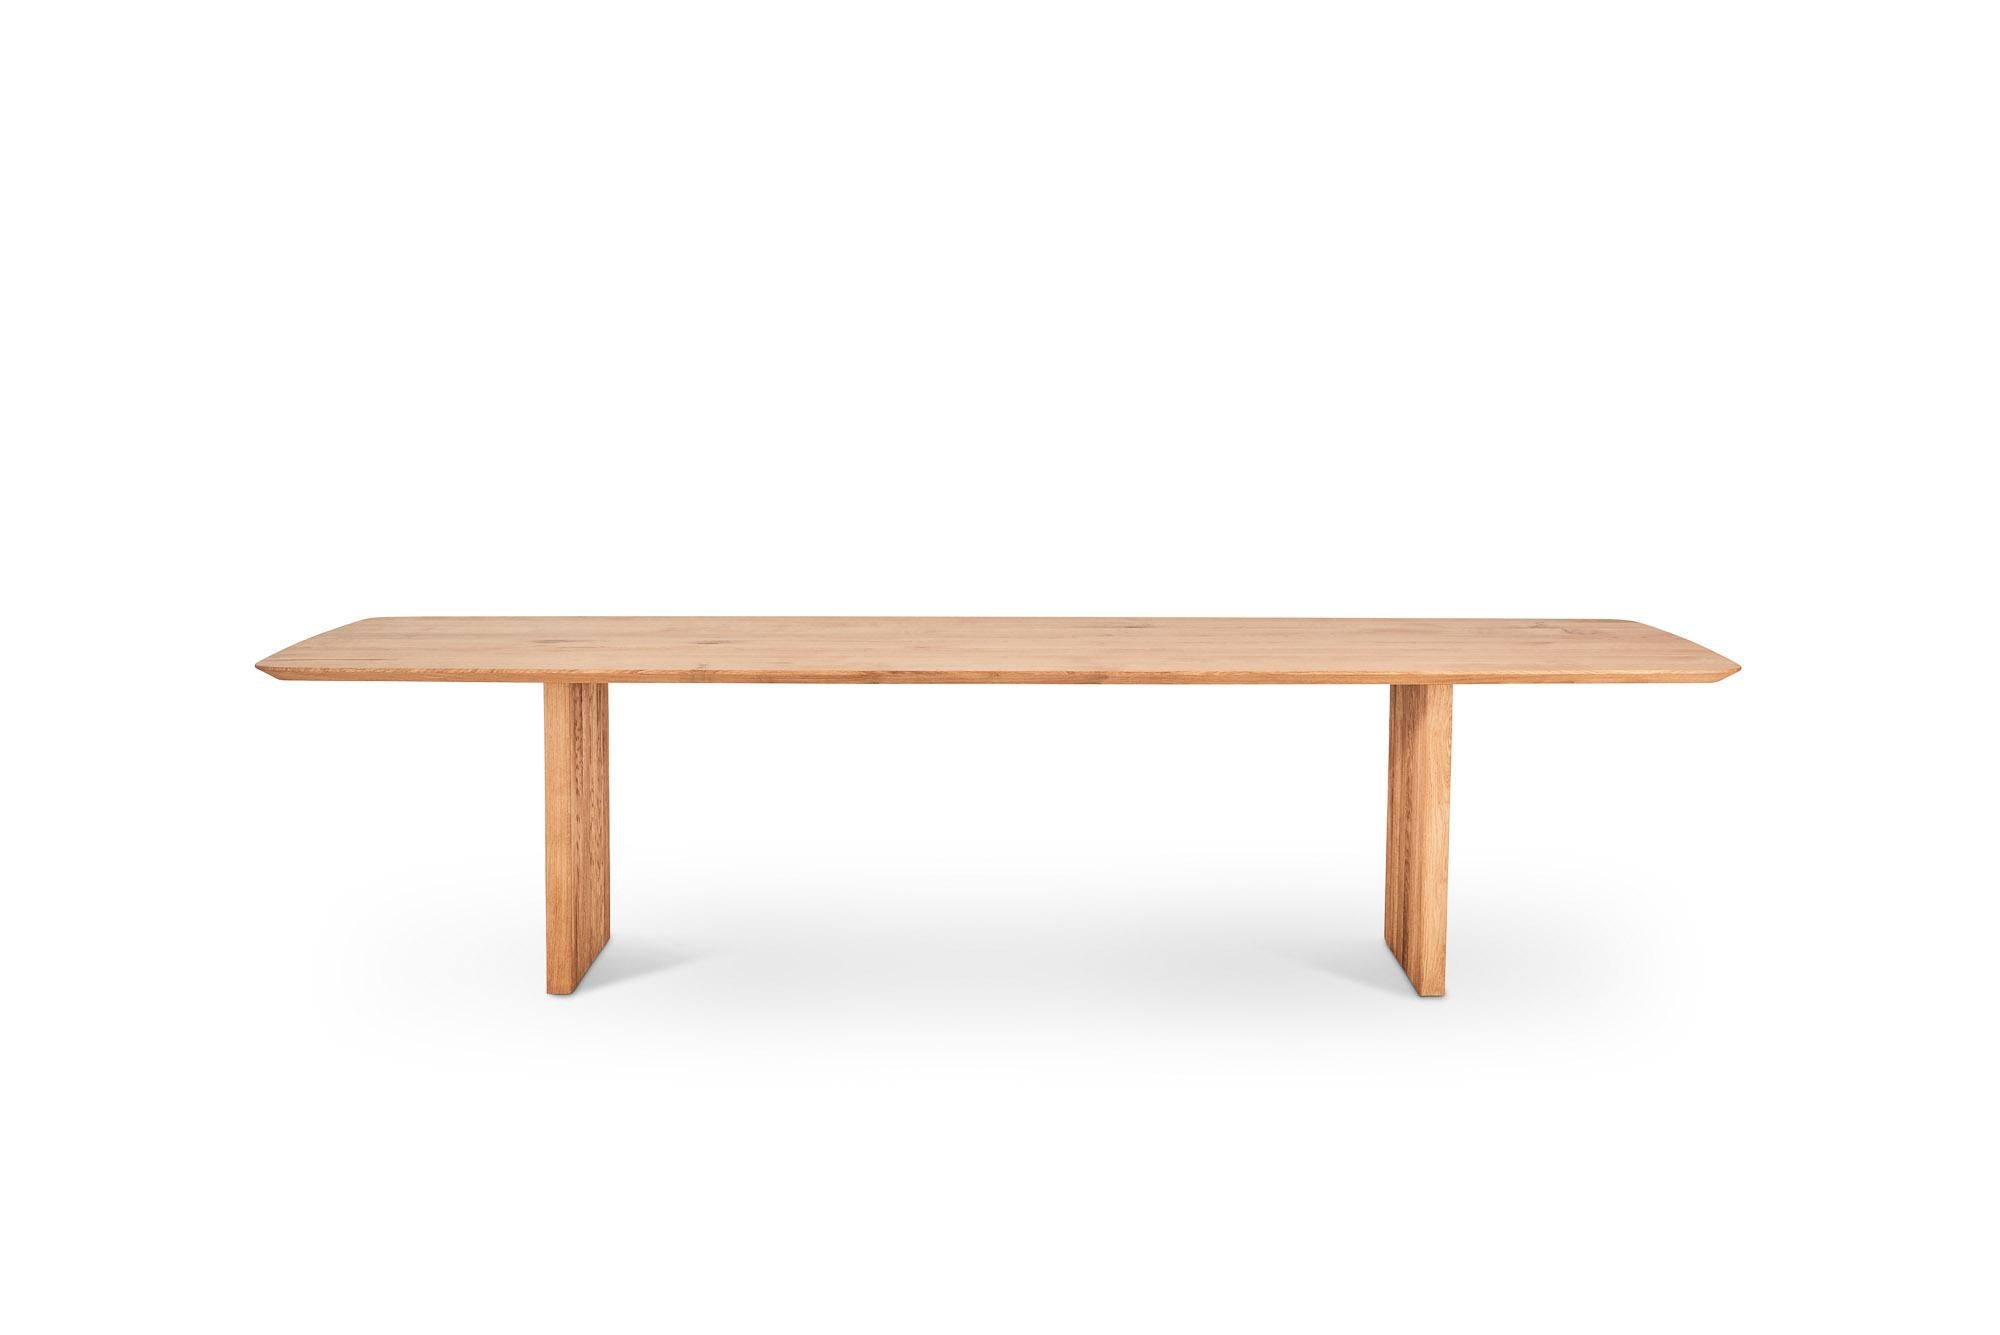 TEN dining table, rectangular, 200cm
Solid wood tabletop and legs. Handmade in Denmark.

Height: 72 or 74 cm

Tabletop dimensions:
– 200 x 95 cm
– 240 x 105 cm
– 270 x 105 cm
– 300 x 105 cm
– 340 x 105 cm
– 370 x 105 cm
– 400 x 105